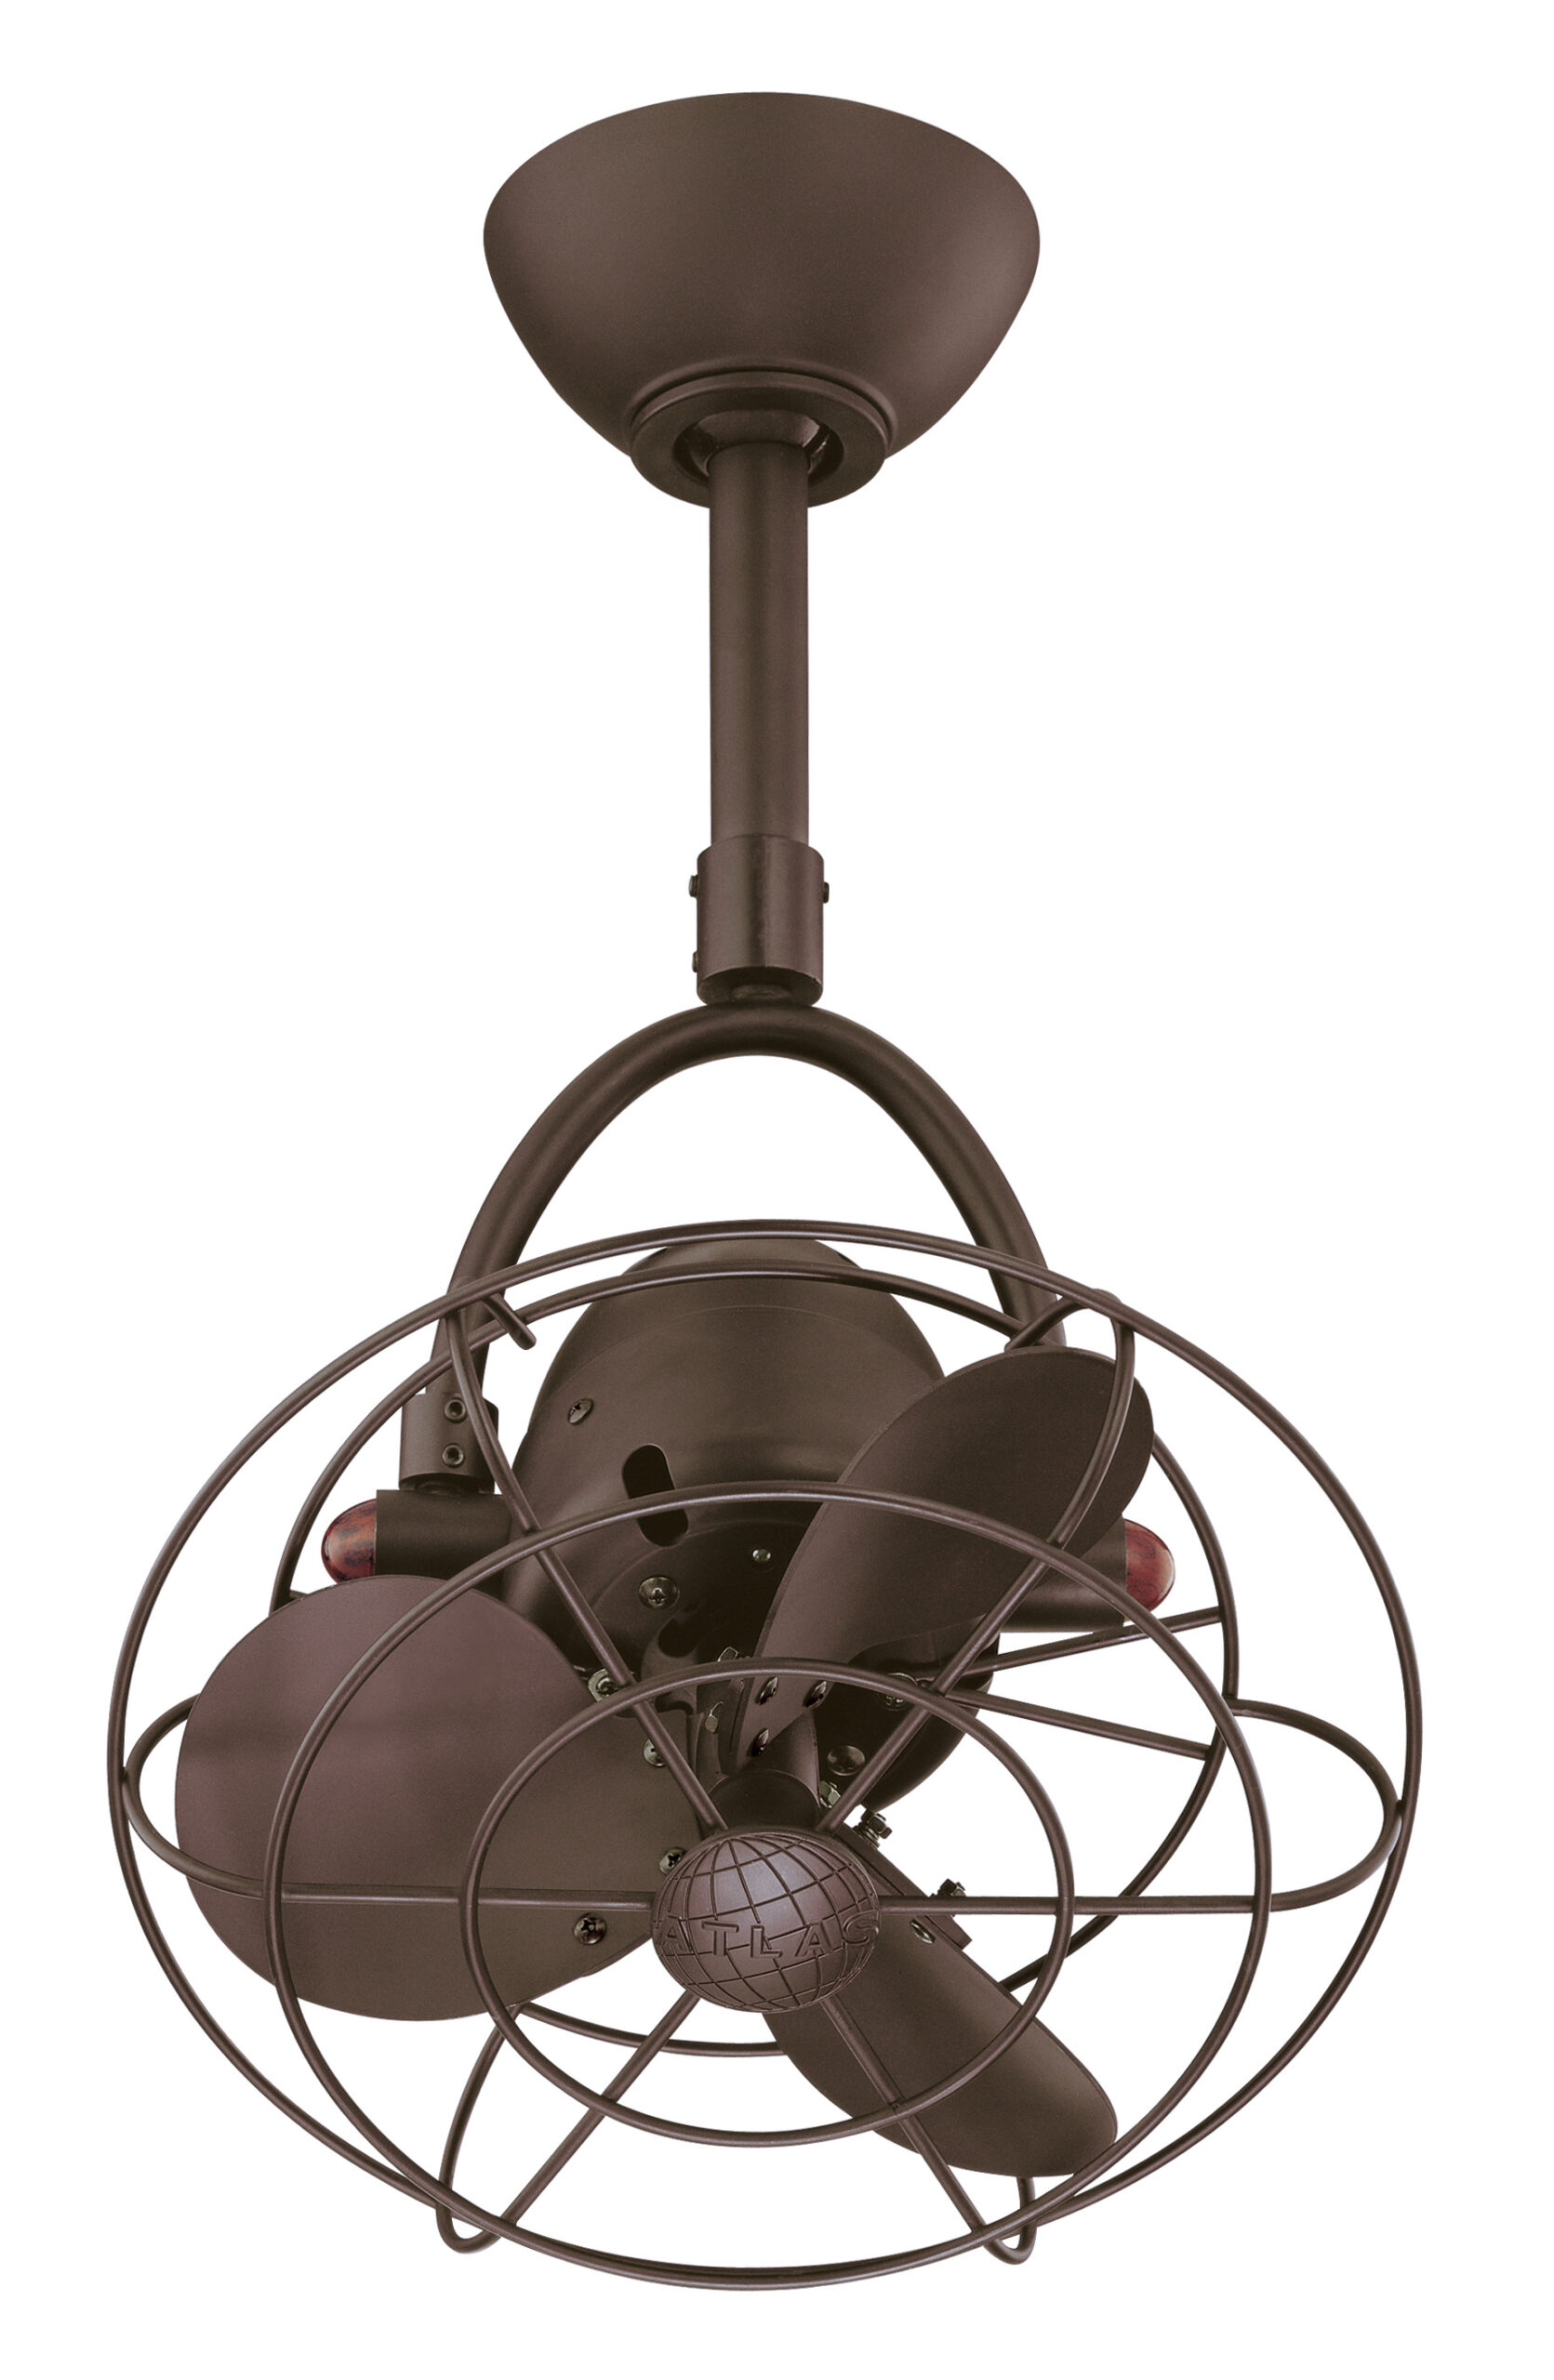 Diane Ceiling Fan in Textured Bronze with Metal Blades and Decorative Cage